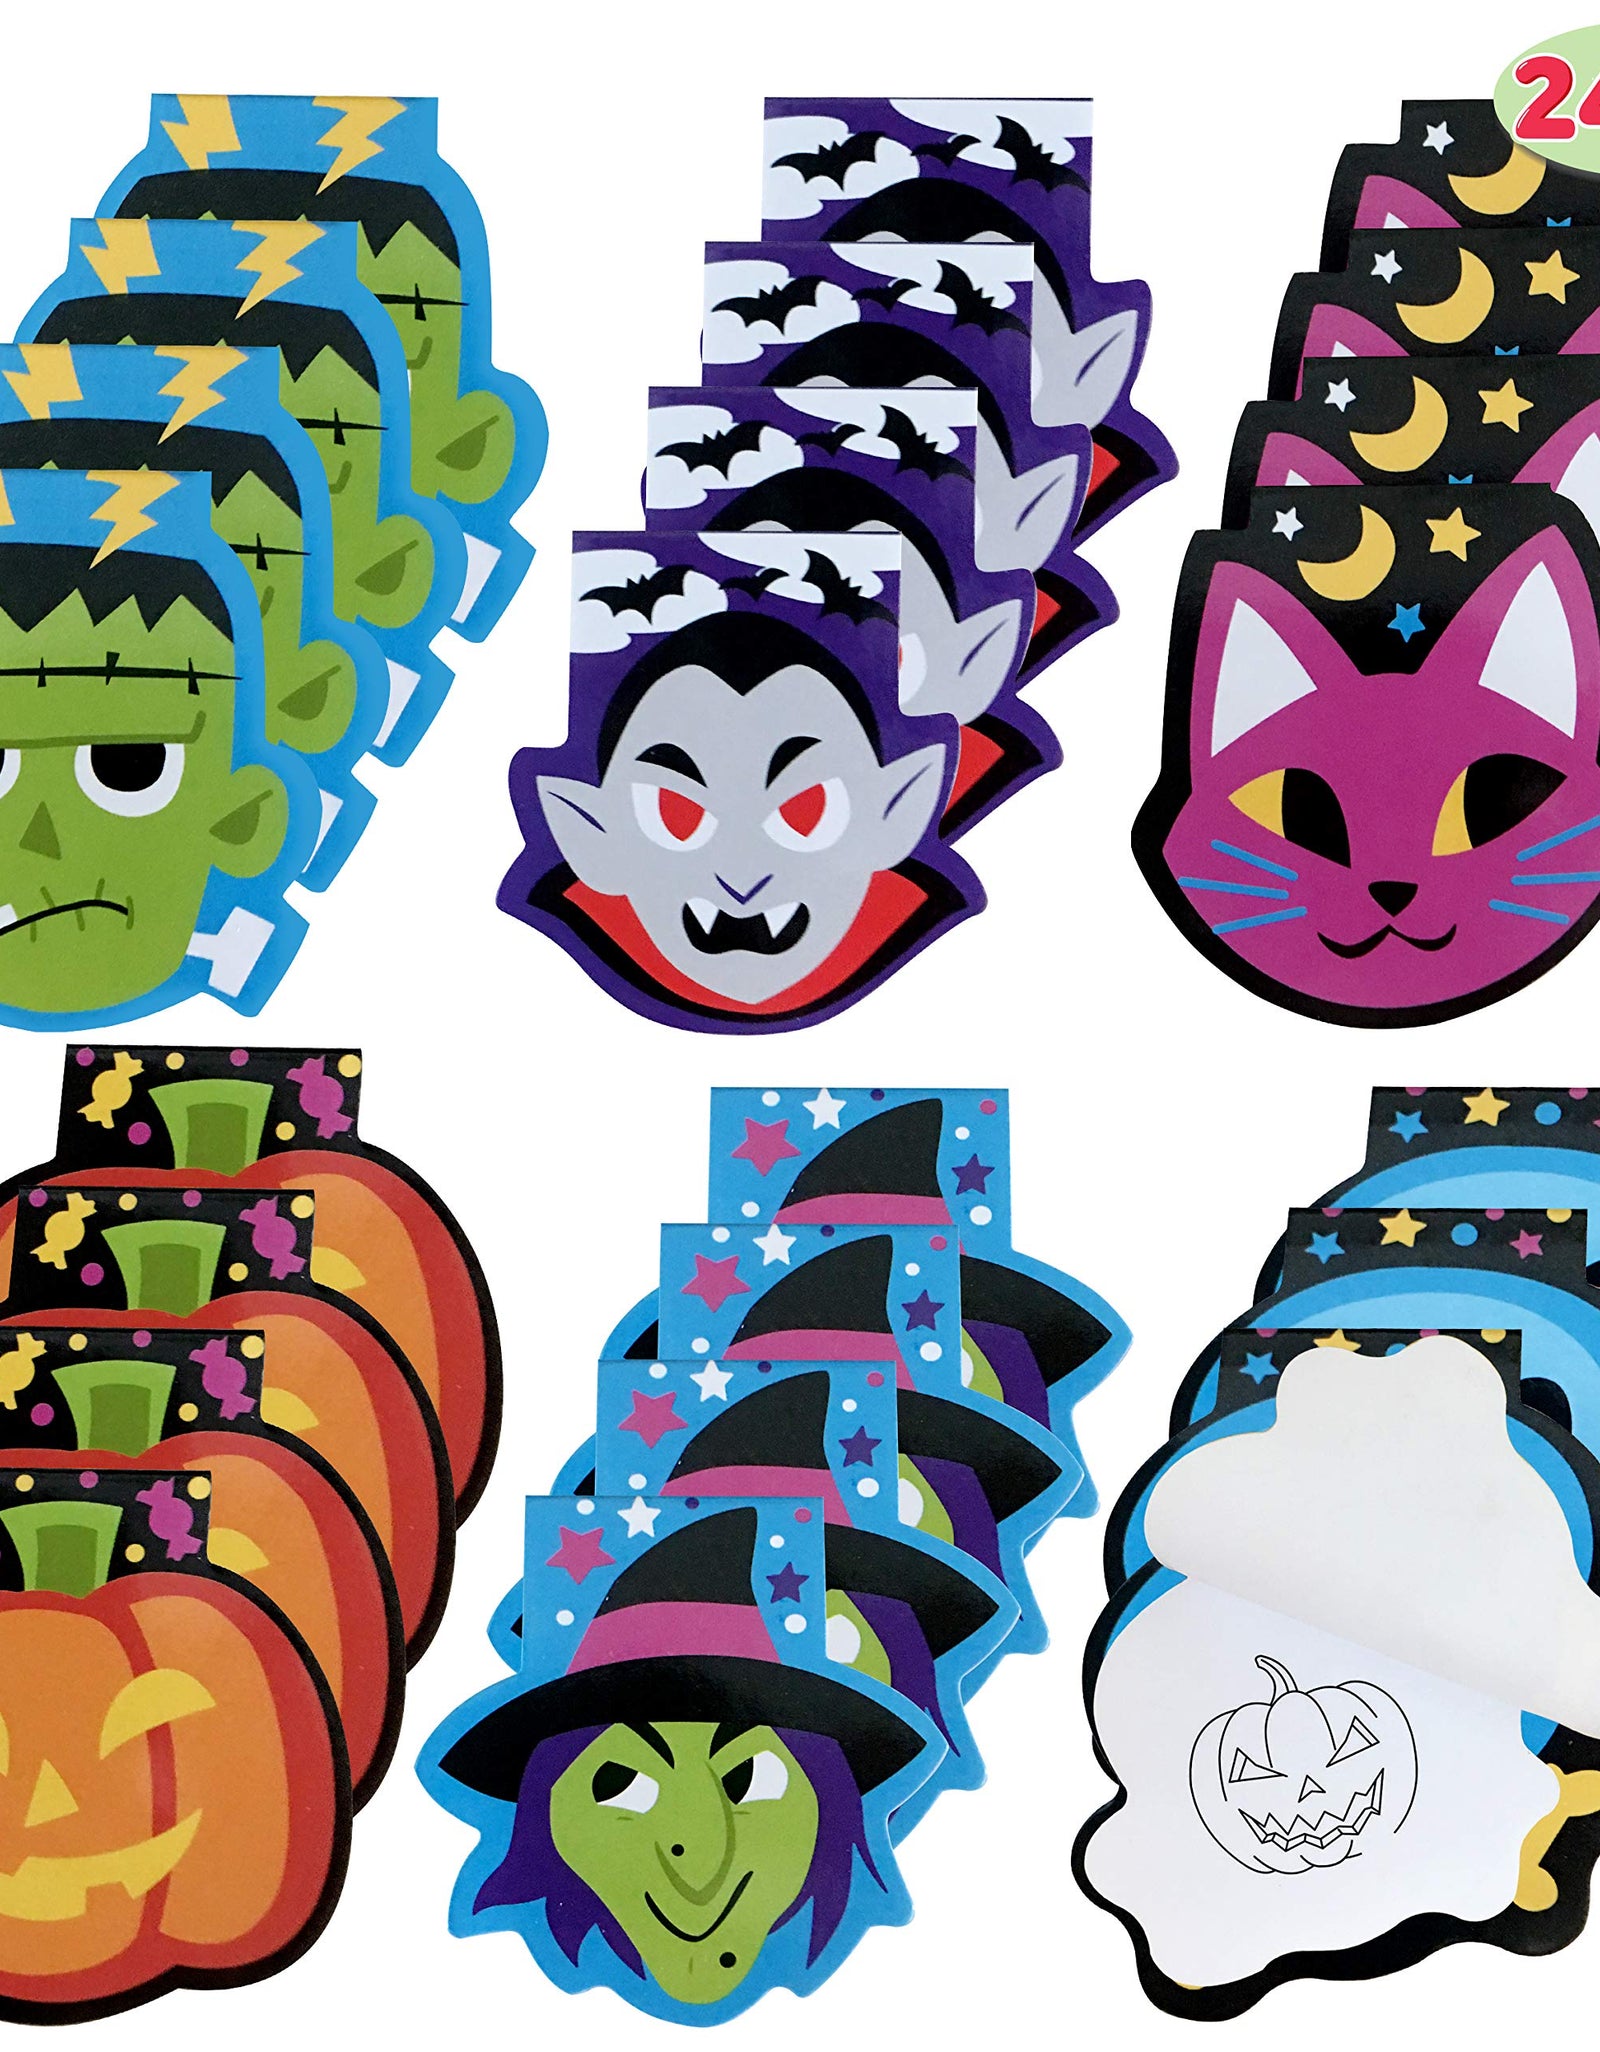 168 Pcs 24 Pack Assorted Halloween Art and Craft Stationery Kids Gift Set Trick or Treat Party Favor Toy Including Halloween Bag, Notepads, Stamps, Pencils, Stickers and Temporary Tattoos